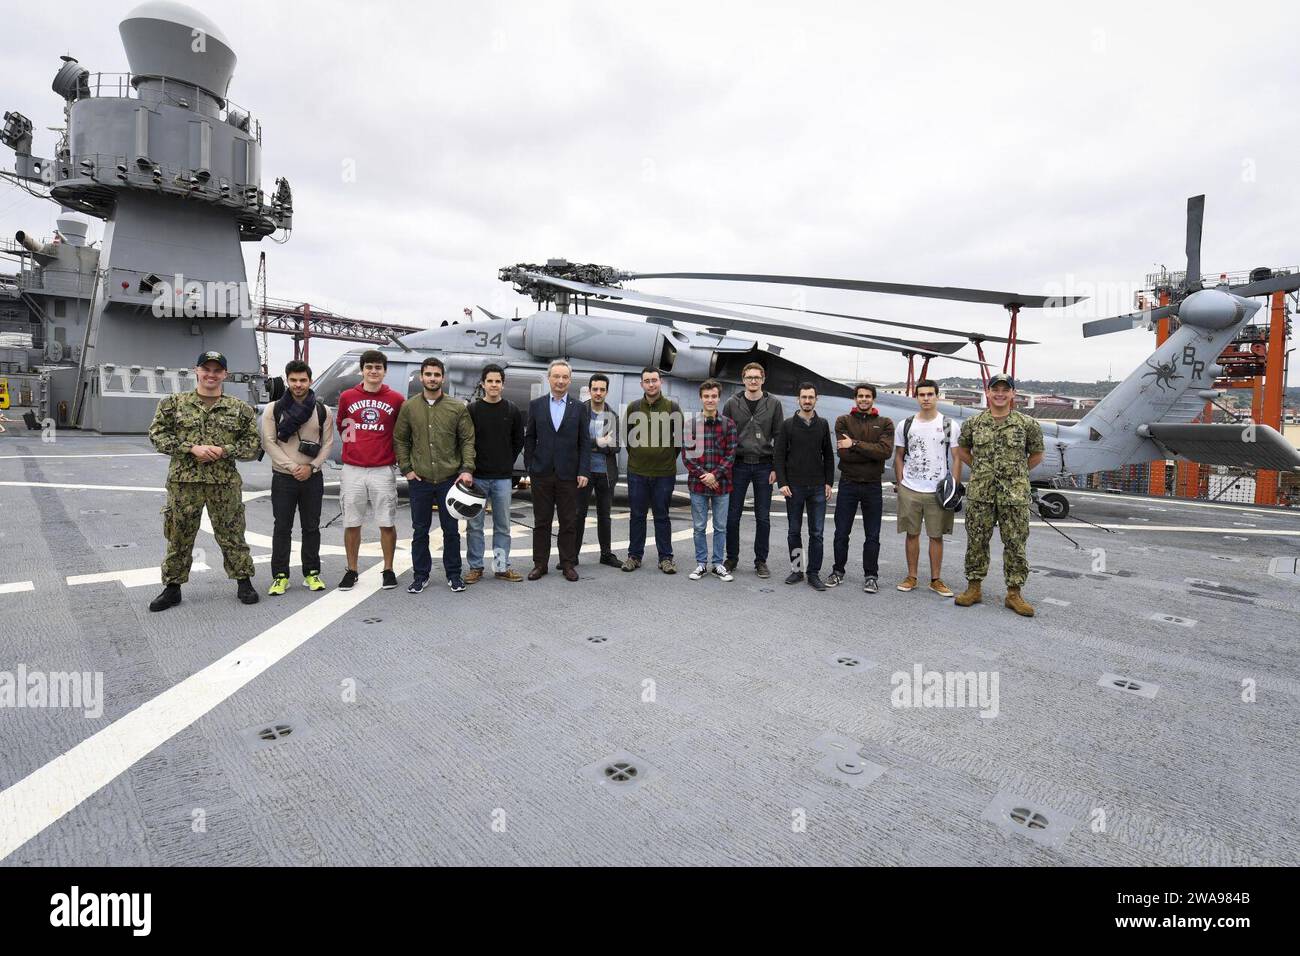 US military forces. 180522XT273-266 LISBON, Portugal (May 22, 2018) Electronic's Technician 2nd Class Petty Officer Gavin Beaver and Information Systems Technician 2nd Class Petty Officer Myles Brinkley pose for a group photo with Portuguese engineering students during a community relations tour aboard the U.S. 6th Fleet command and control ship USS Mount Whitney (LCC 20) in Lisbon, Portugal, May 22, 2018. Mount Whitney, the U.S. 6th Fleet flagship, operates with a combined crew of U.S. Navy Sailors and Military Sealift Command civil service mariners.(U.S. Navy photo by Mass Communication Spec Stock Photo